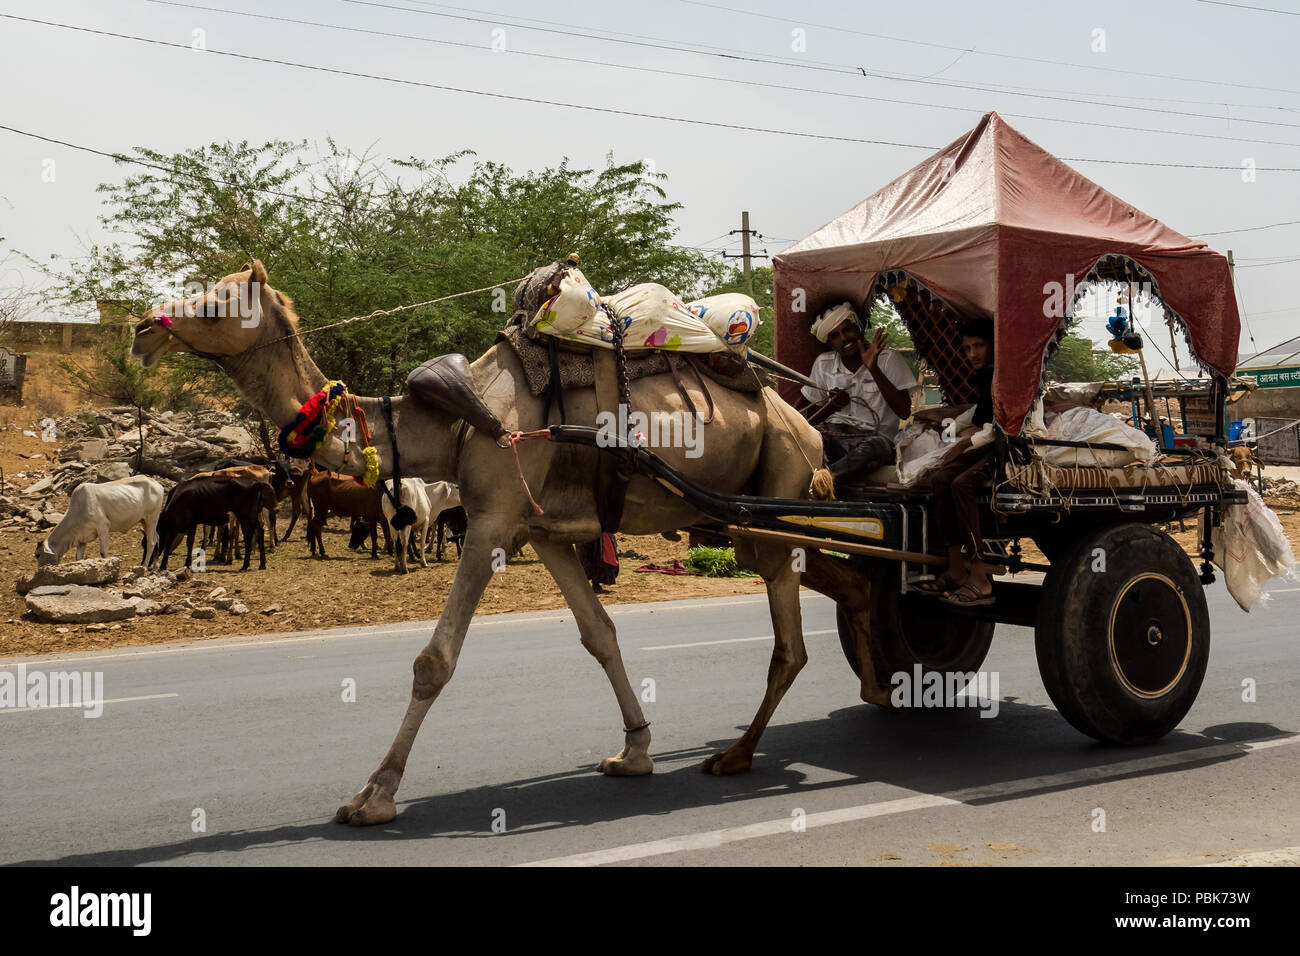 Two-wheeled cart pulled by a camel on the streets of Pushkar in India. June 2018 Stock Photo